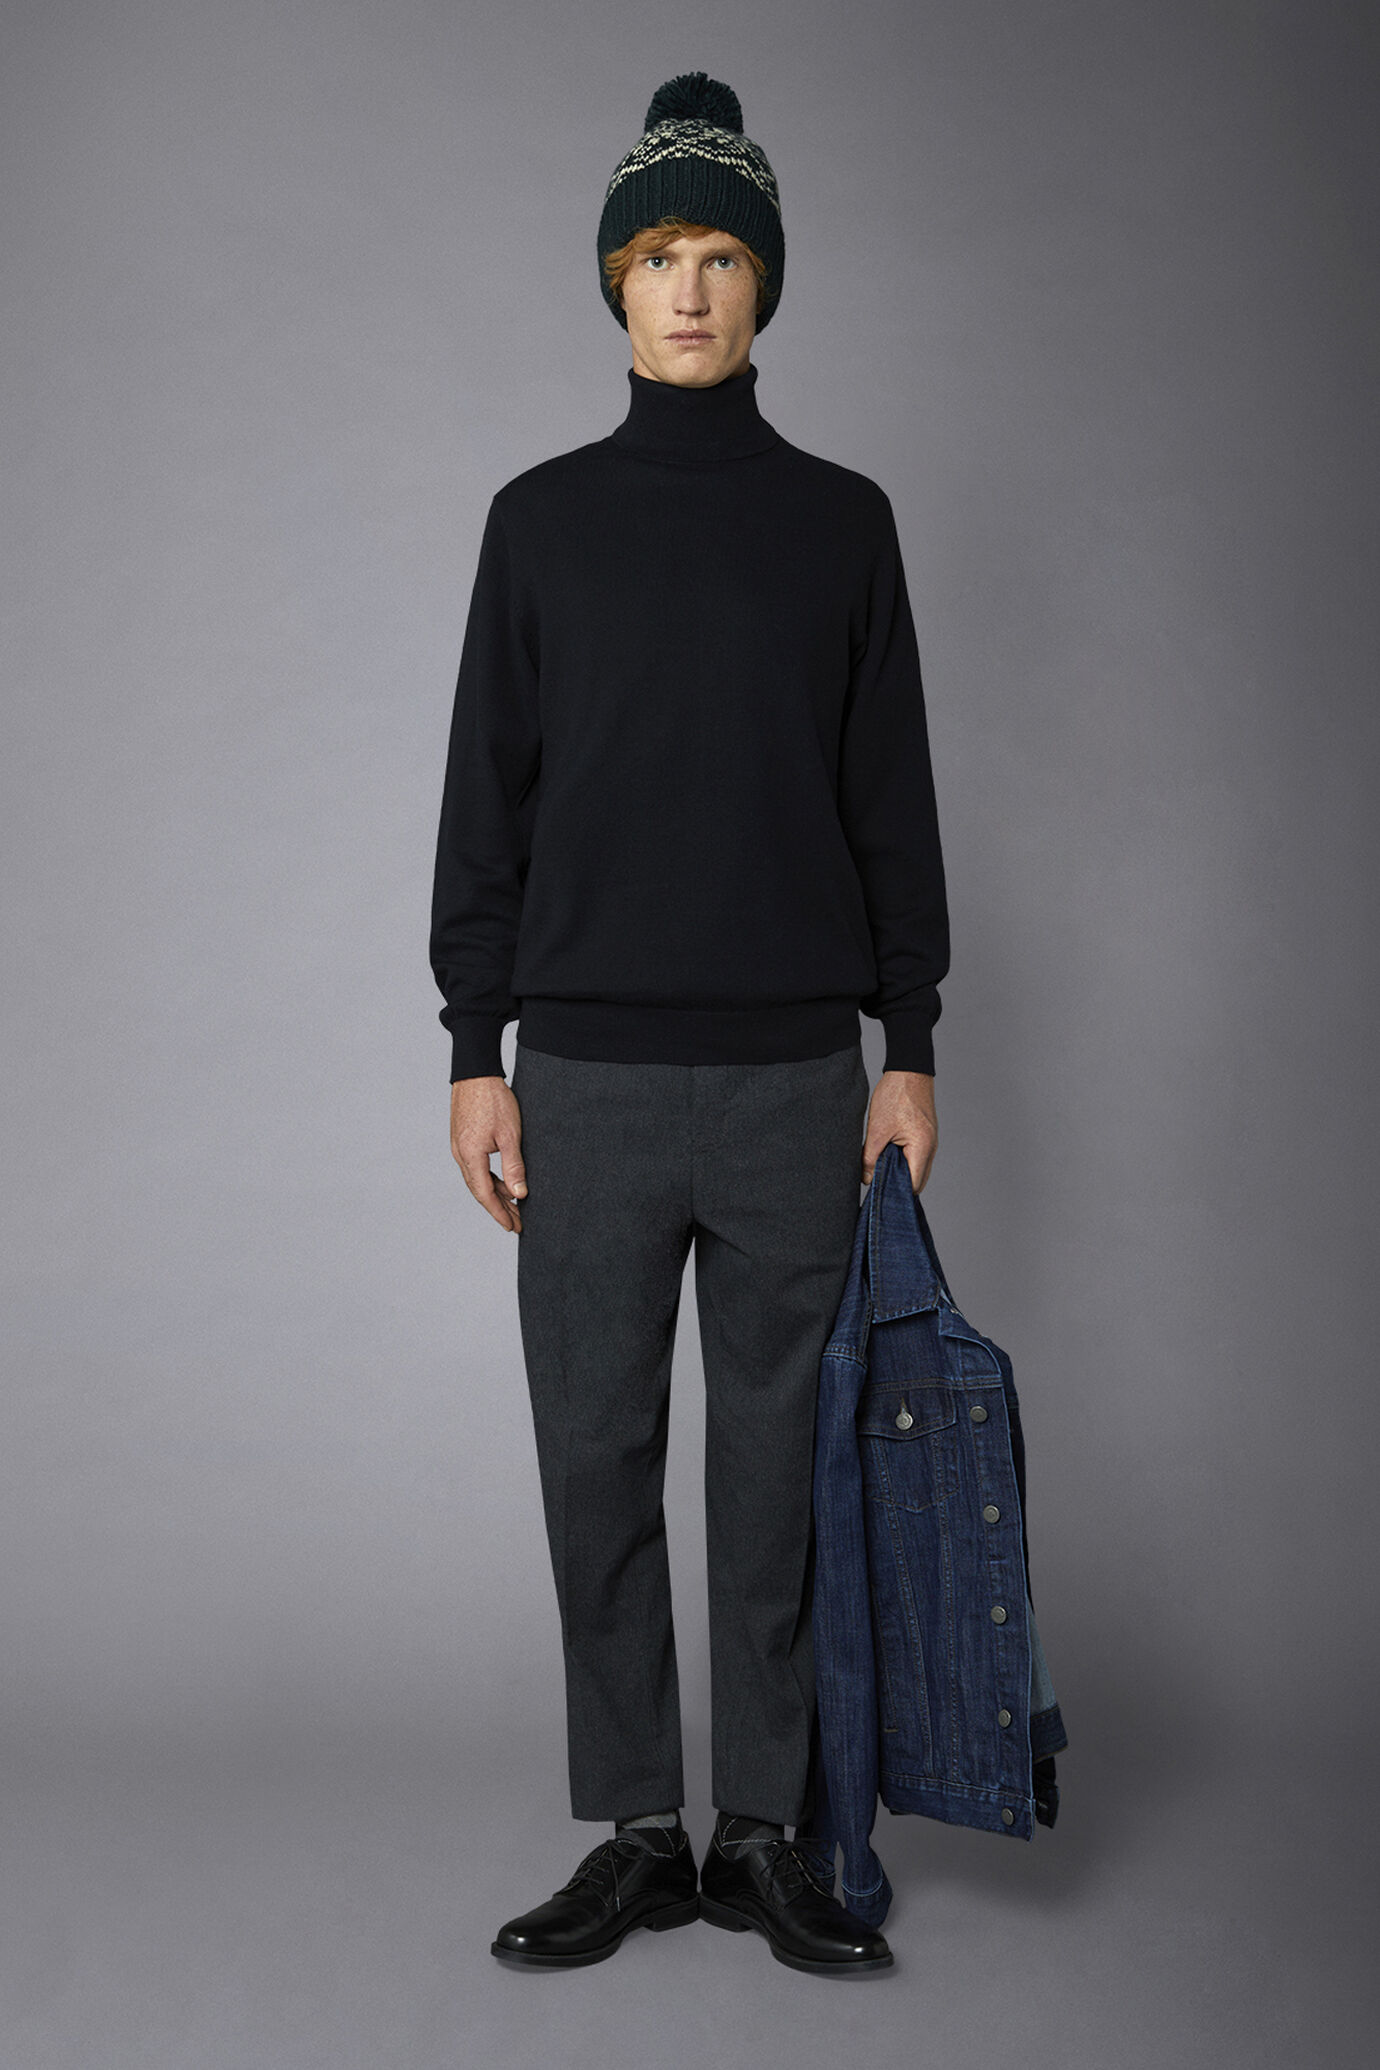 Men's wool and cotton turtleneck sweater